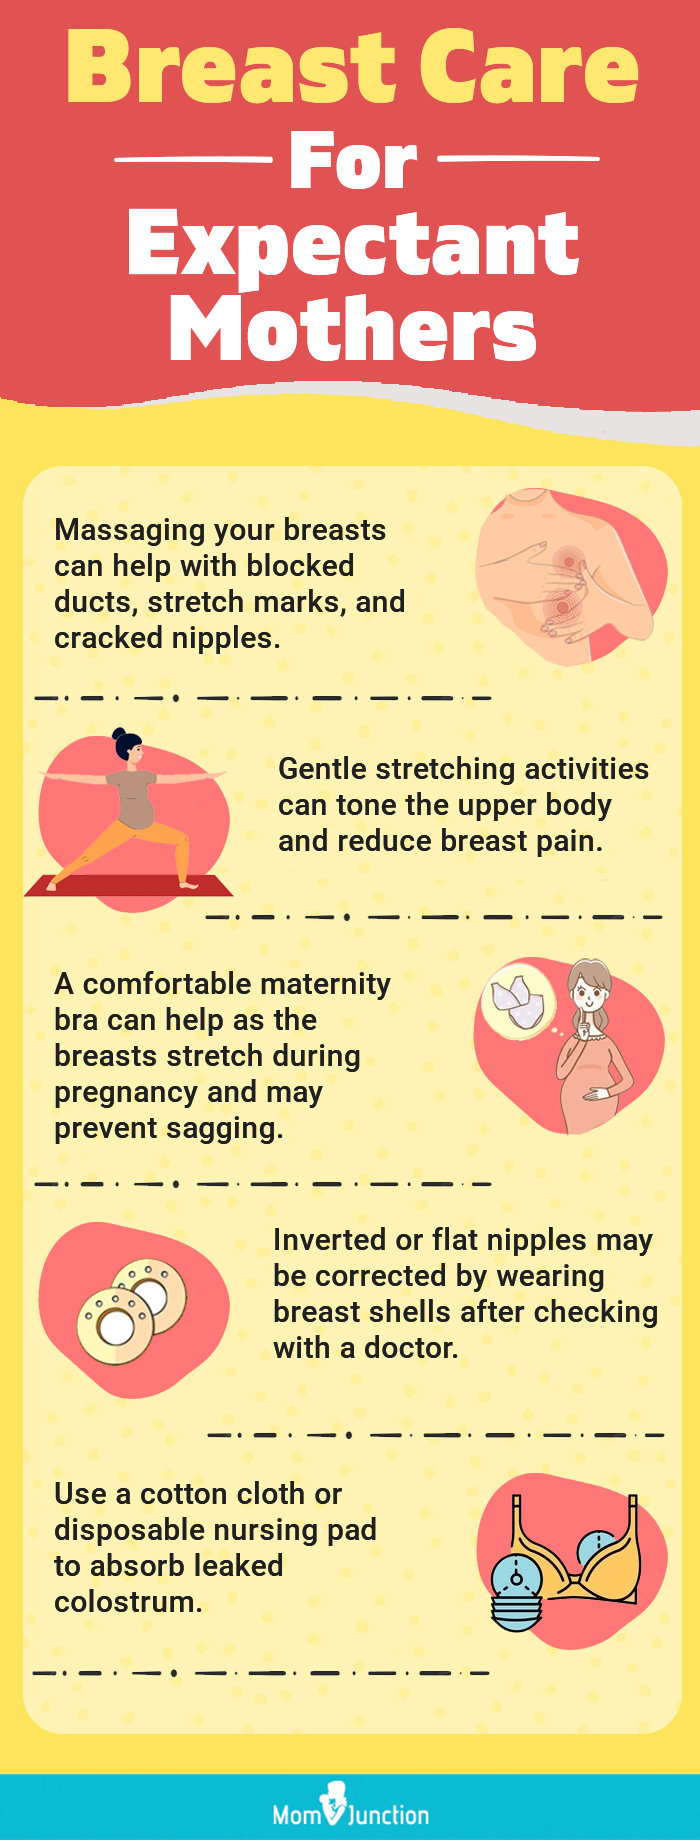 How to Reduce Breast Discomforts During Pregnancy?